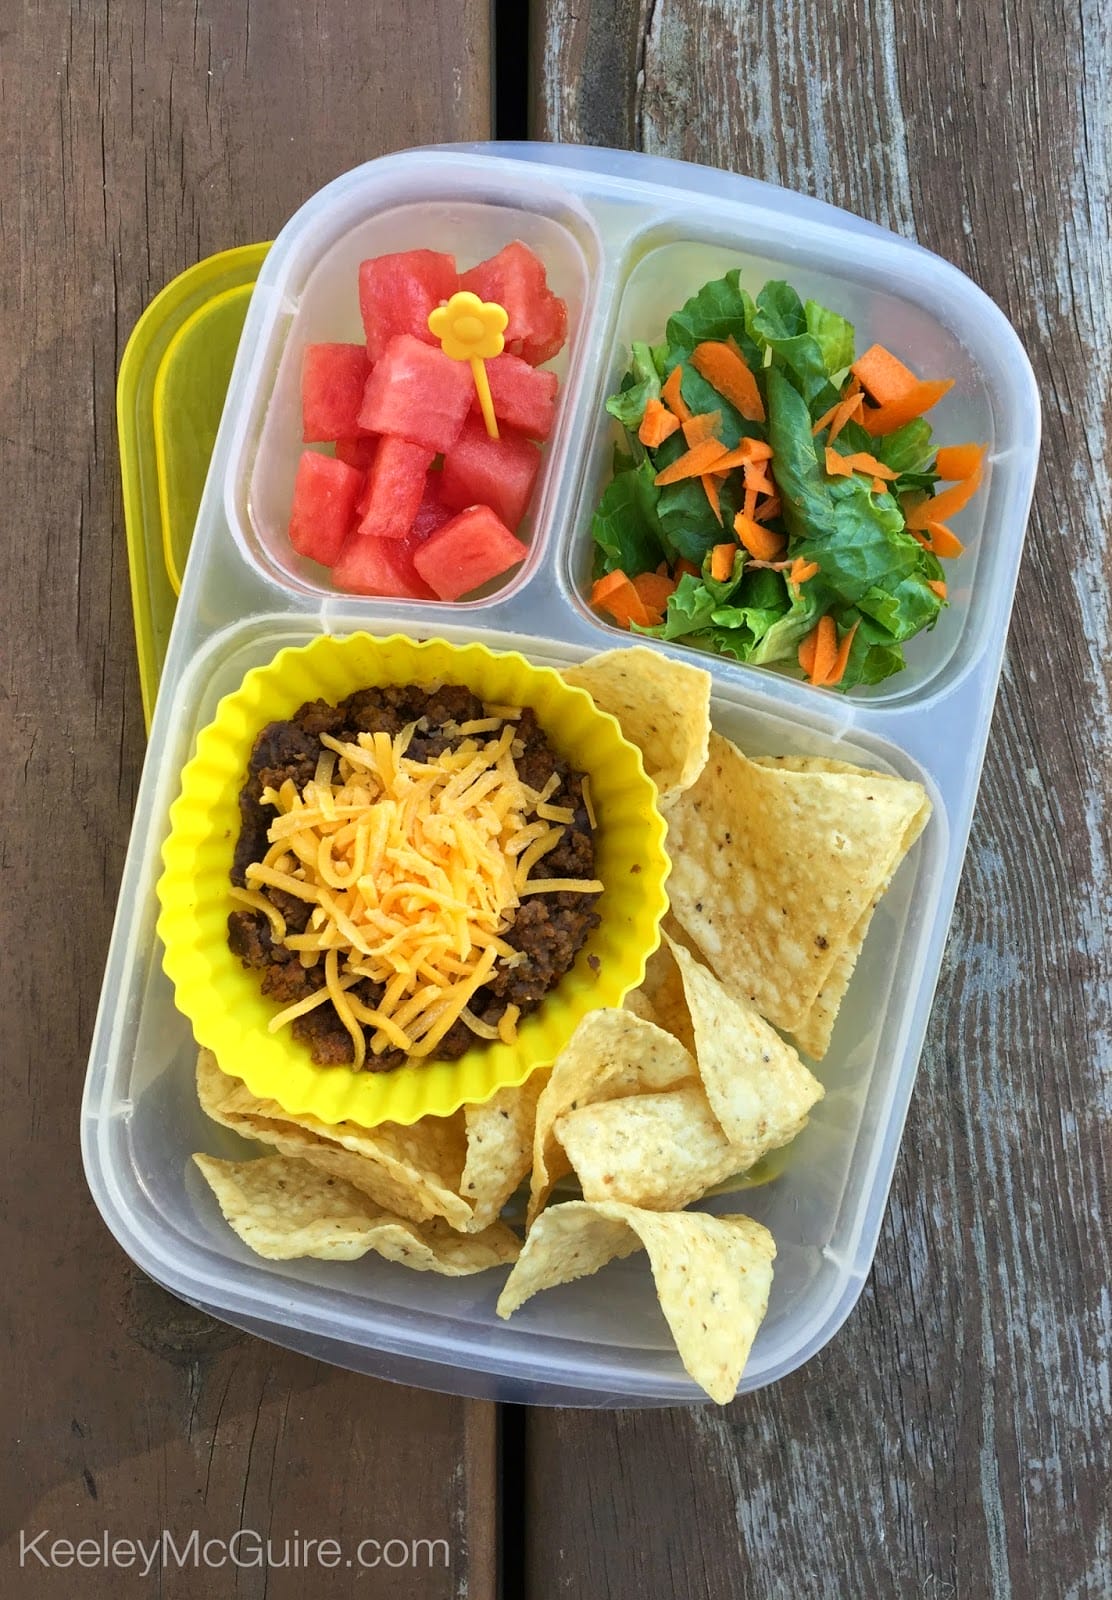 Non Sandwich School Lunch Ideas - So many great school lunch ideas in this post! Hot dogs, quesadillas, mini corn dogs, mac and cheese, taco salad... yum!